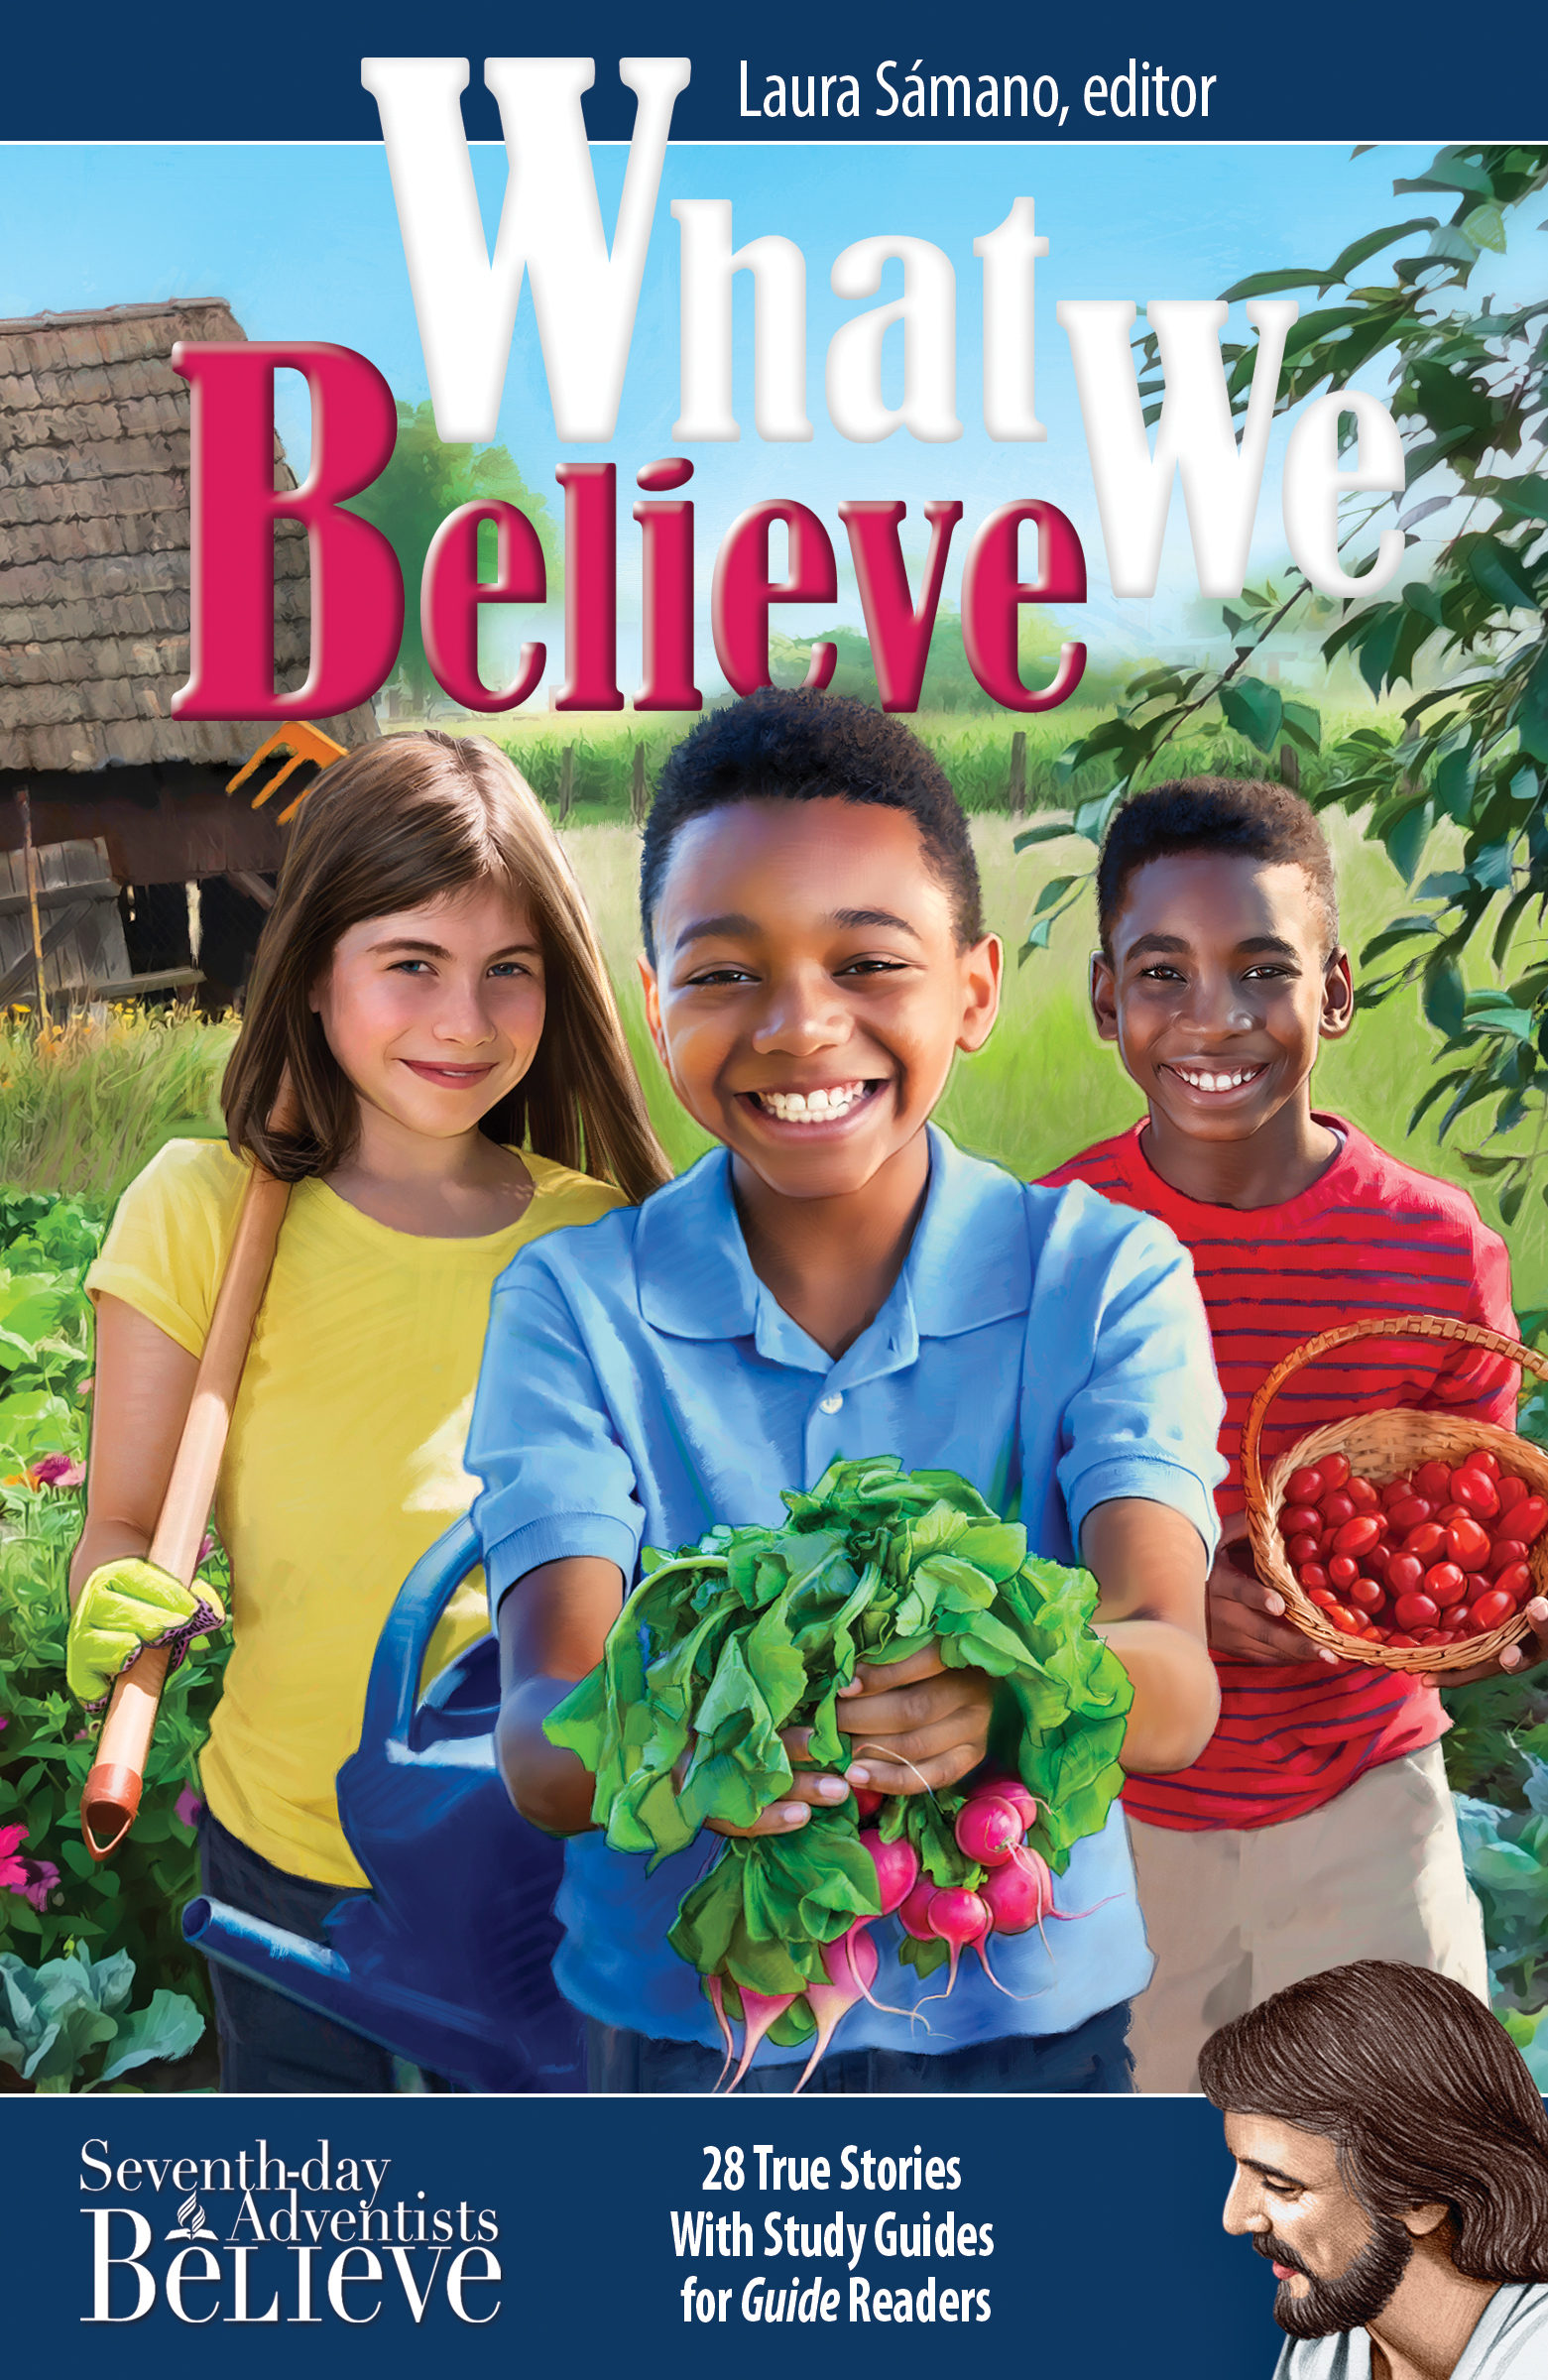 Guide Magazine Publishes a Storybased Adventist Fundamental Beliefs